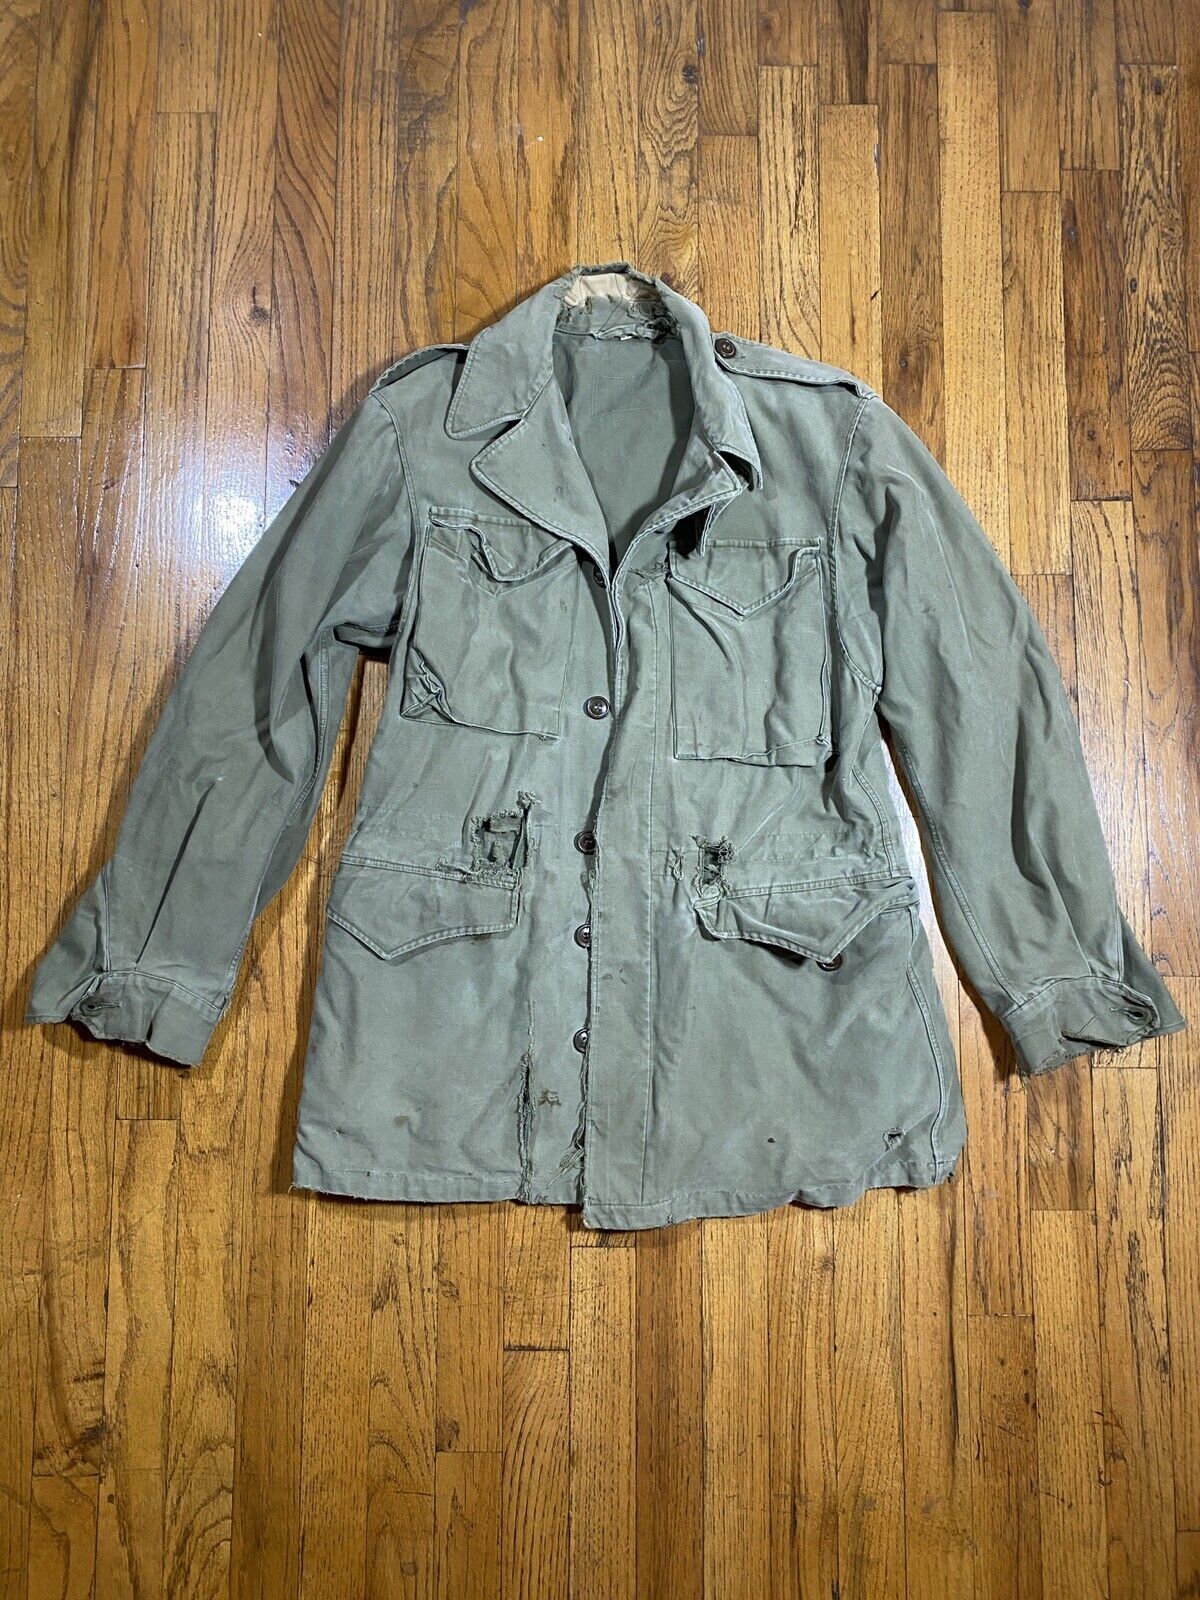 Original US Army M-1943 Military Olive Green Field Jacket 34L Faded + Thrashed